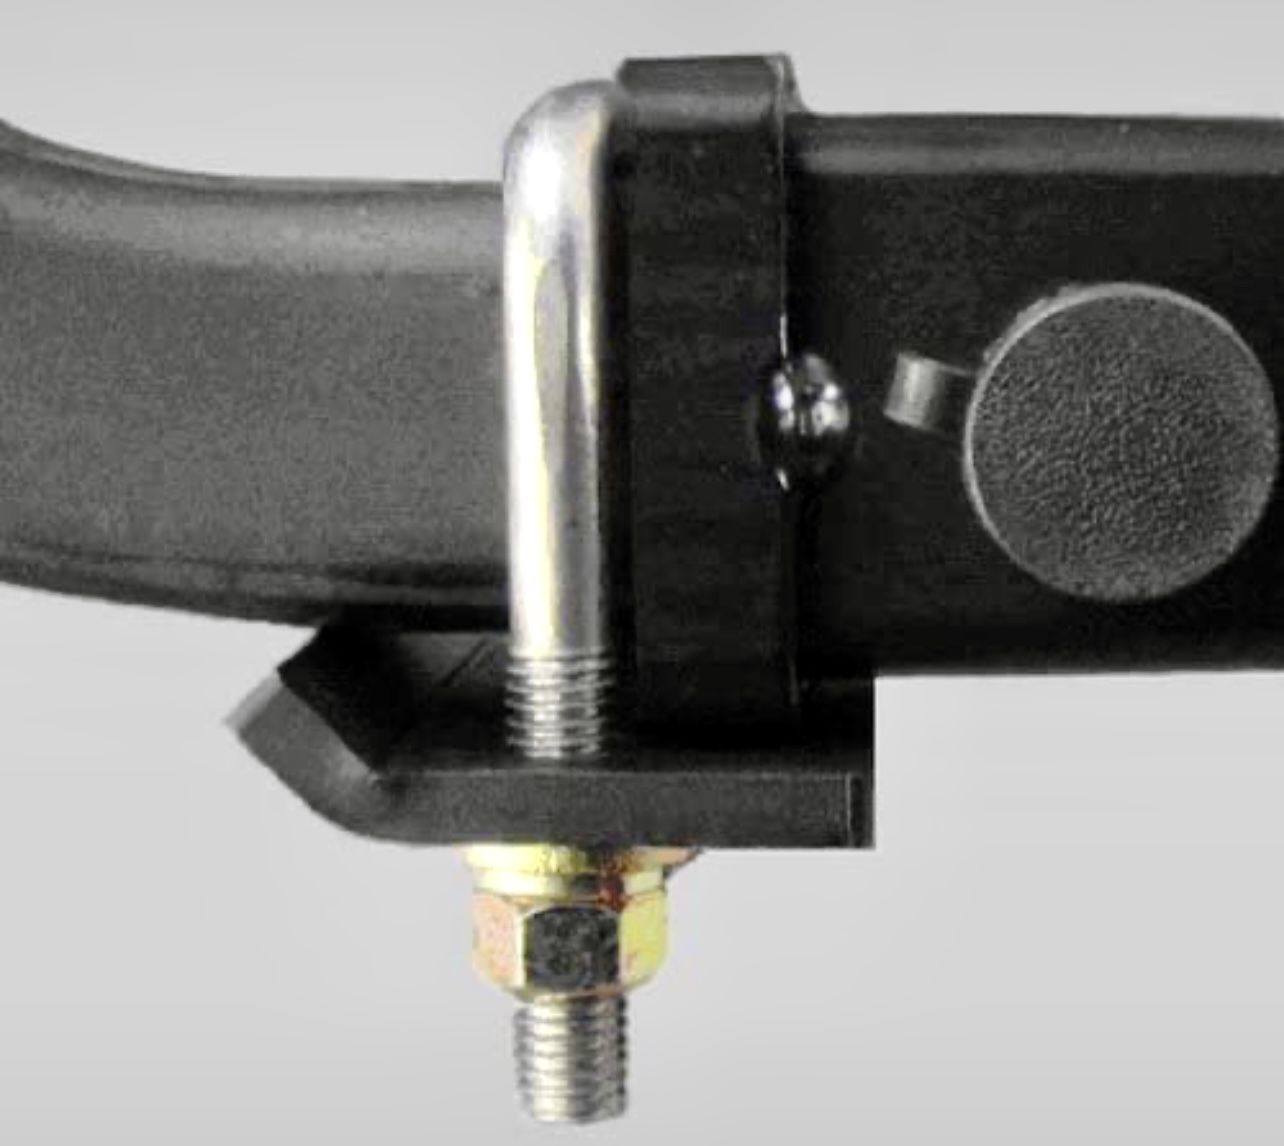 StowAway Hitch Tightener, Anti-Rattle Stabilizer for 2 Inch and 1.25 Inch Hitches. Made in USA.